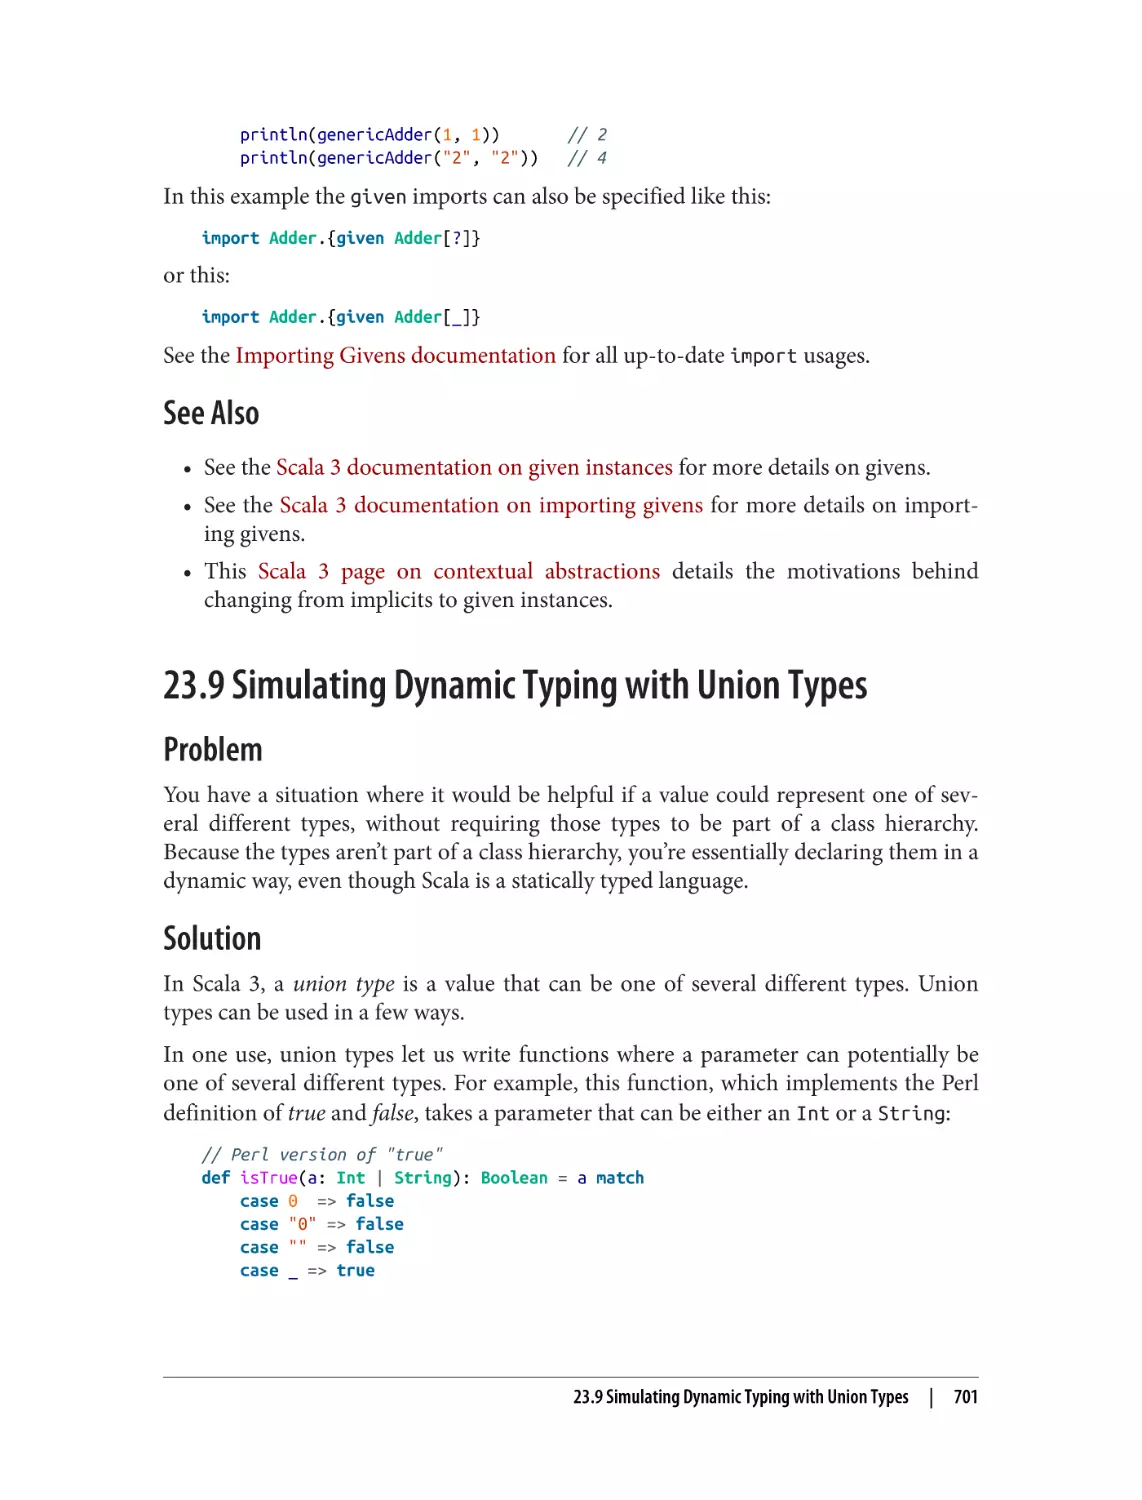 See Also
23.9 Simulating Dynamic Typing with Union Types
Problem
Solution